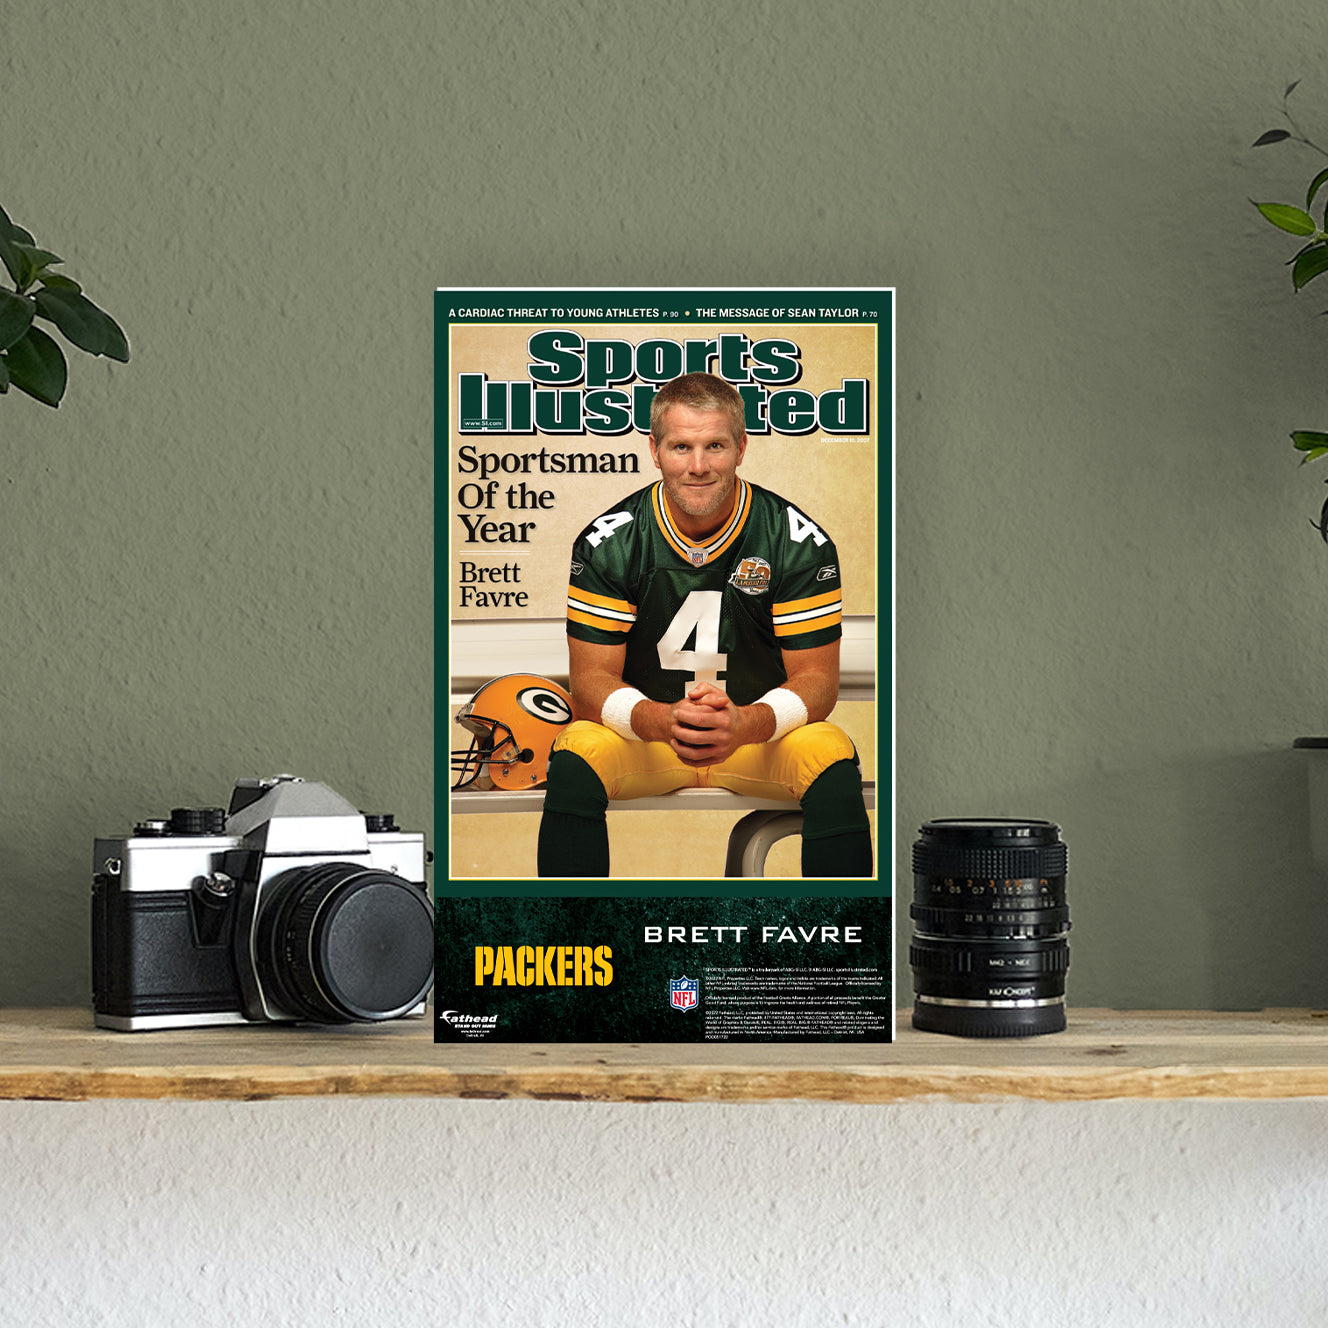 Green Bay Packers: Brett Favre December 2007 Sportsman of the Year Sports Illustrated Cover  Mini   Cardstock Cutout  - Officially Licensed NFL    Stand Out